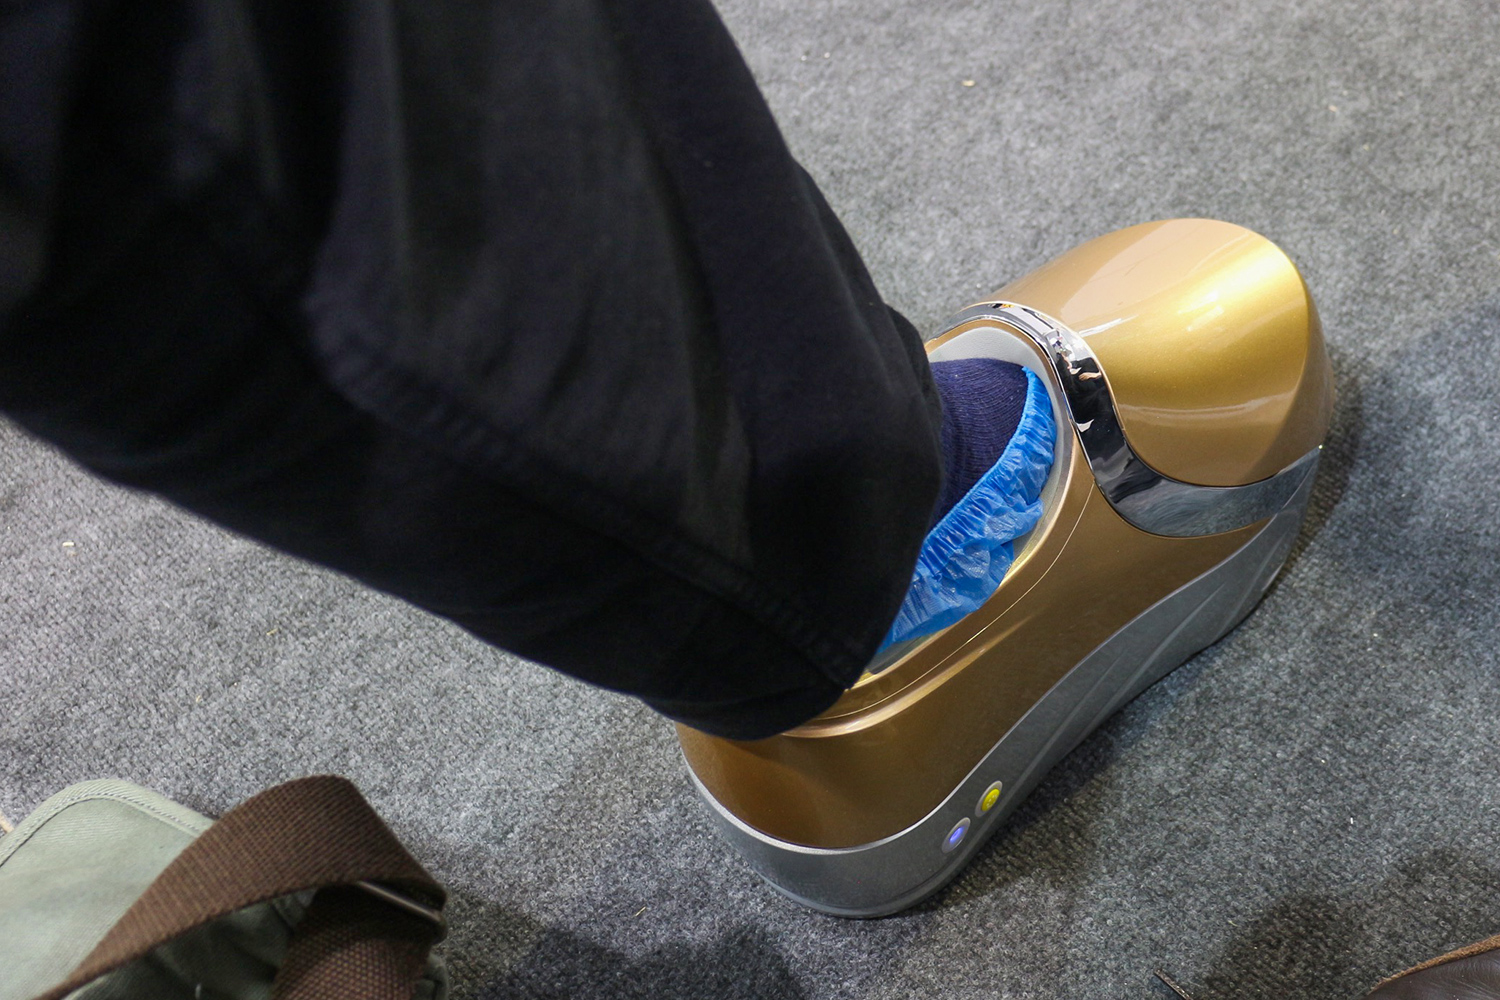 Fittop Foot Massager